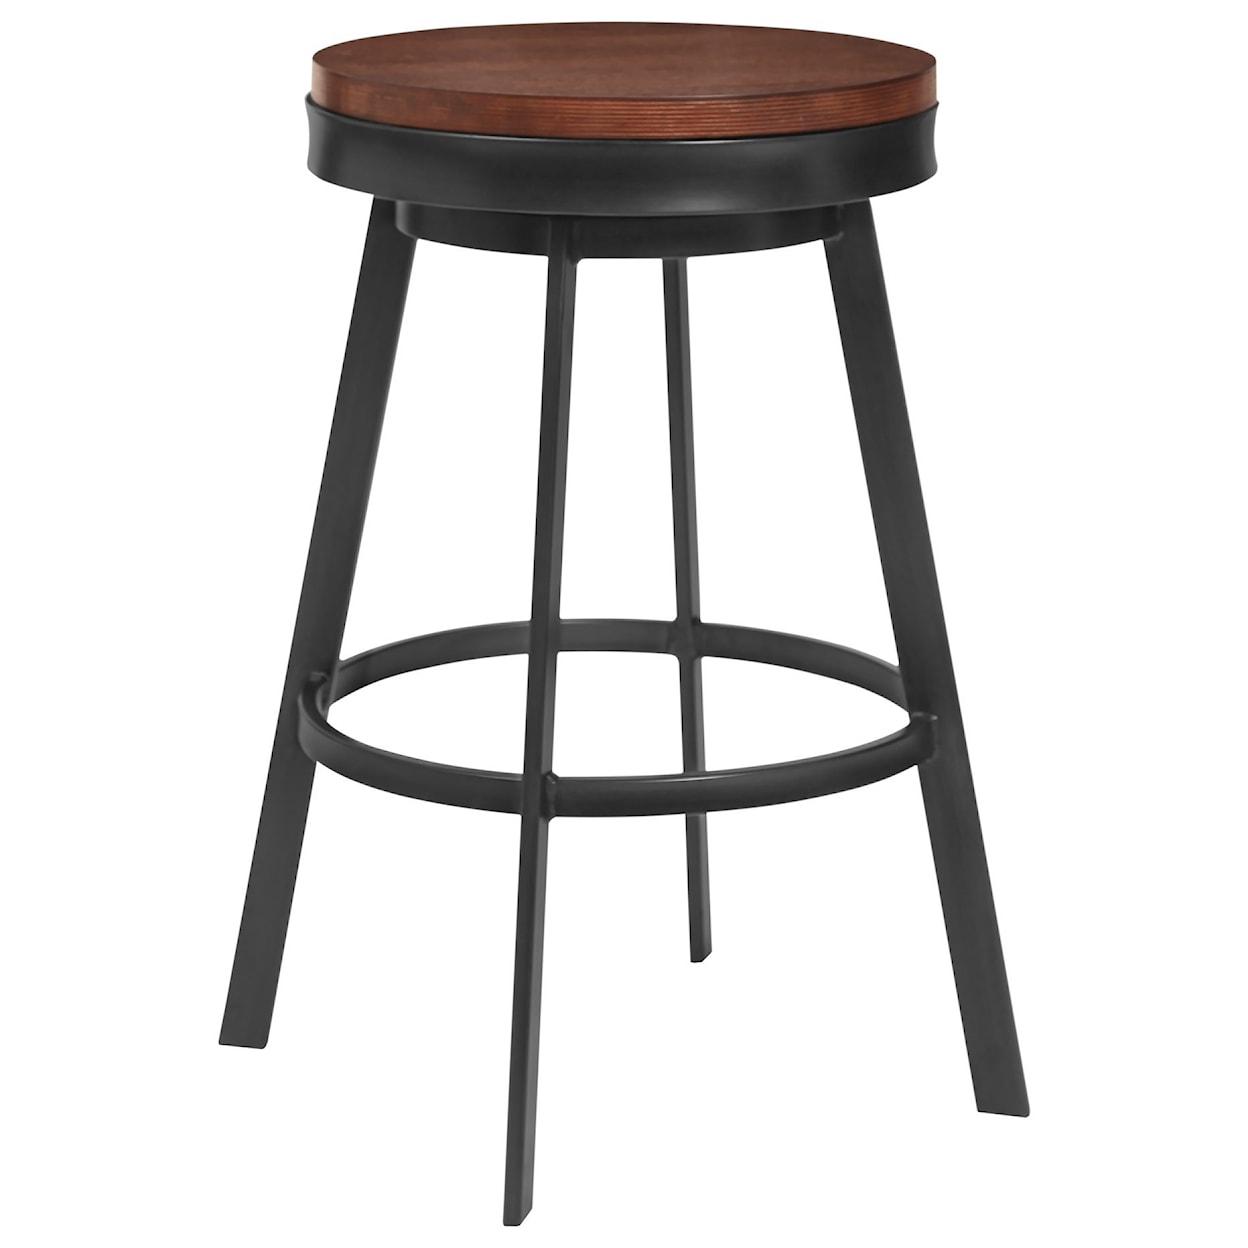 Armen Living Topeka 26" Counter Height Barstool in Mineral